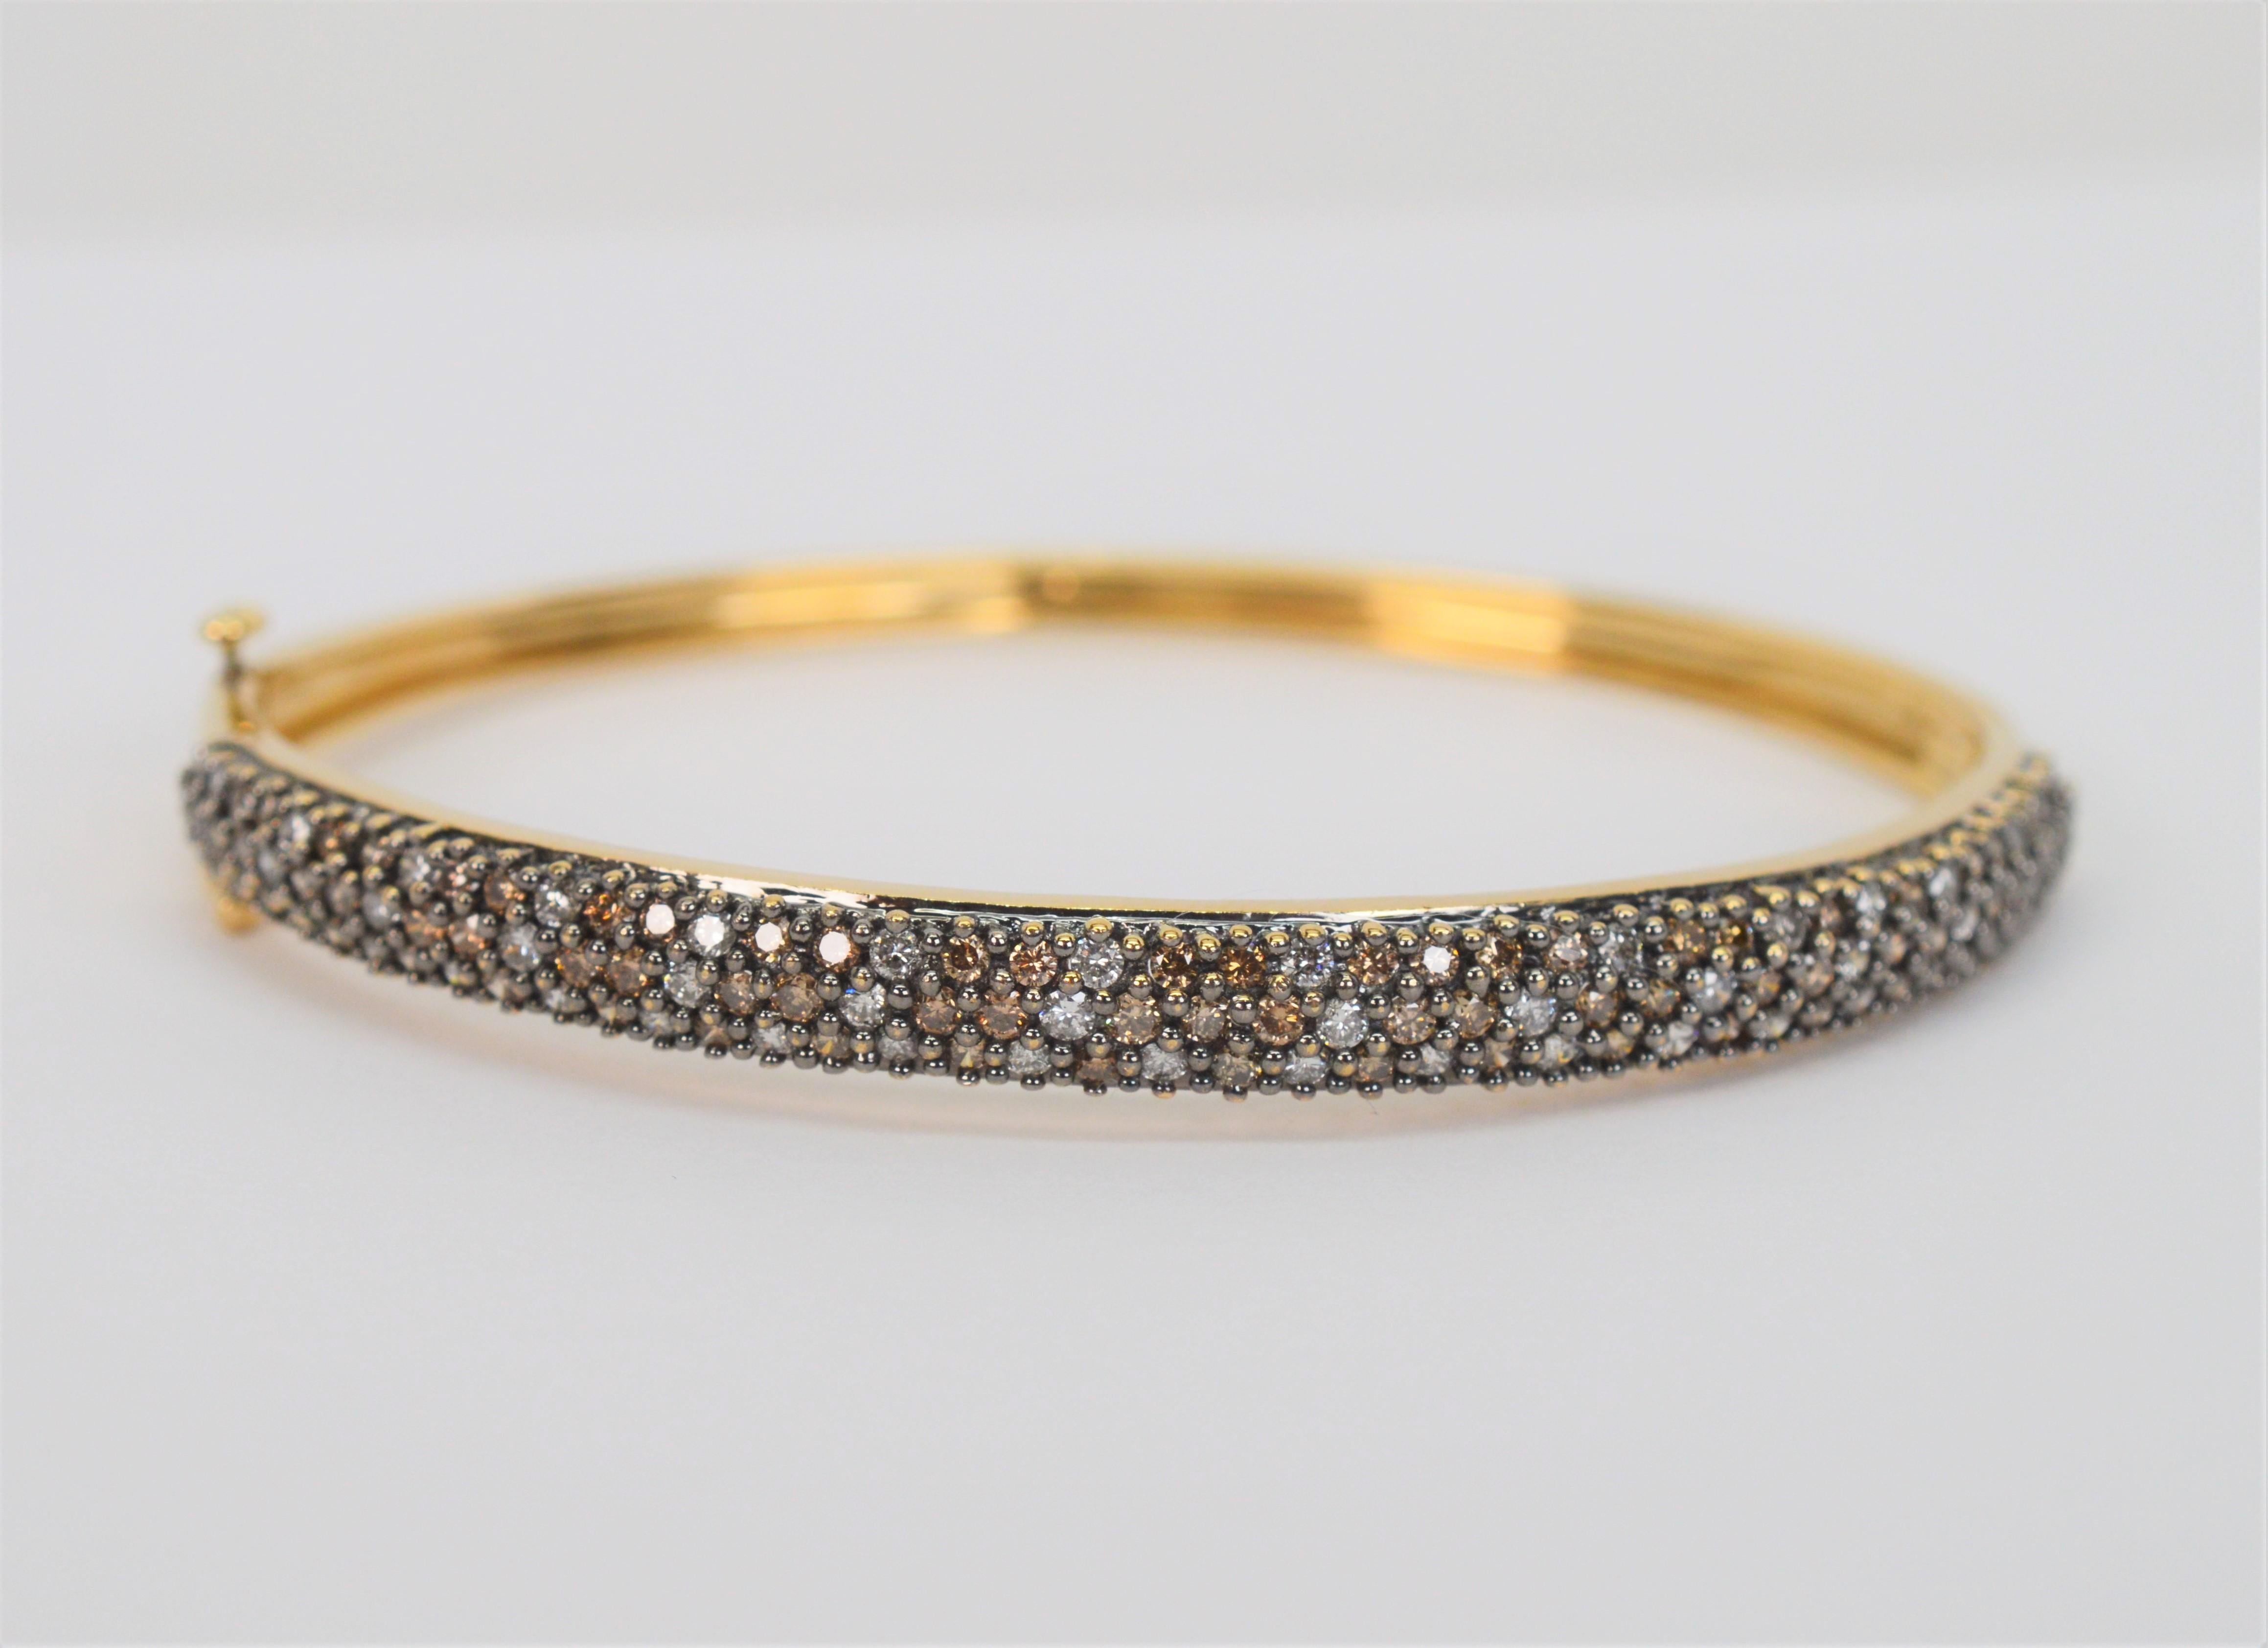 Espresso Diamond 14 Karat Yellow Gold Bangle Bracelet by Effy In Excellent Condition For Sale In Mount Kisco, NY